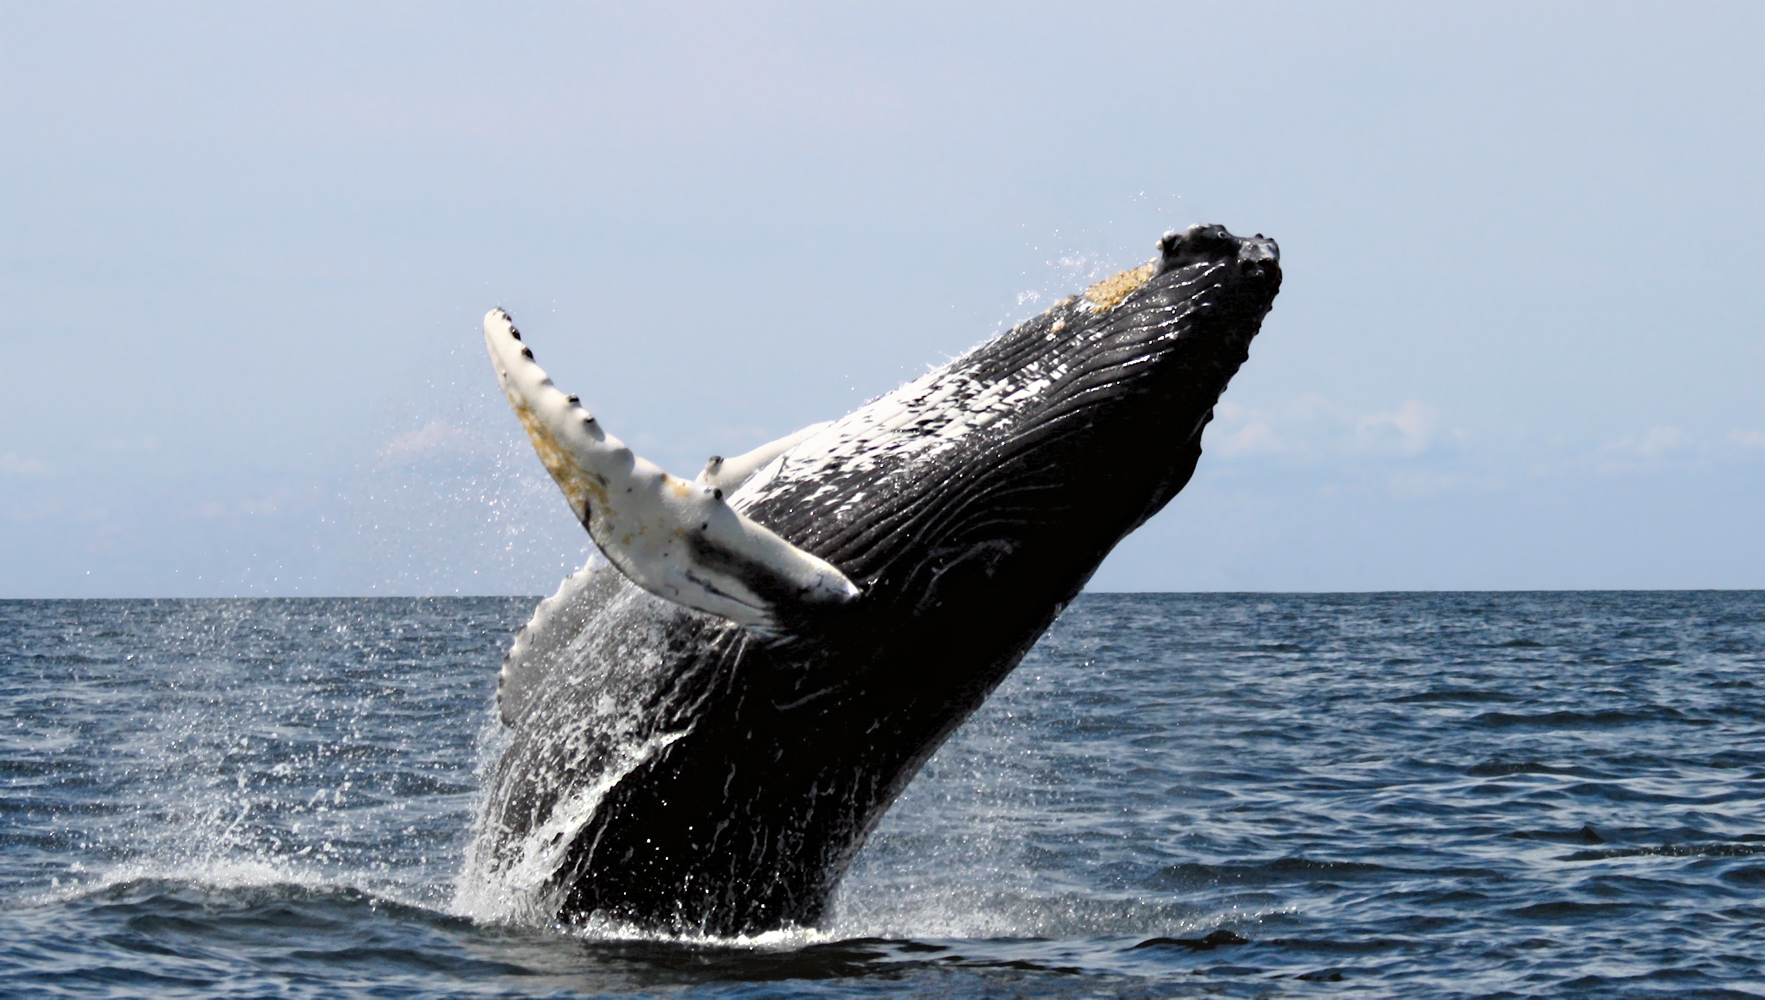 Humpback Whale leaping out of the water, Photo Credit Wikipedia.